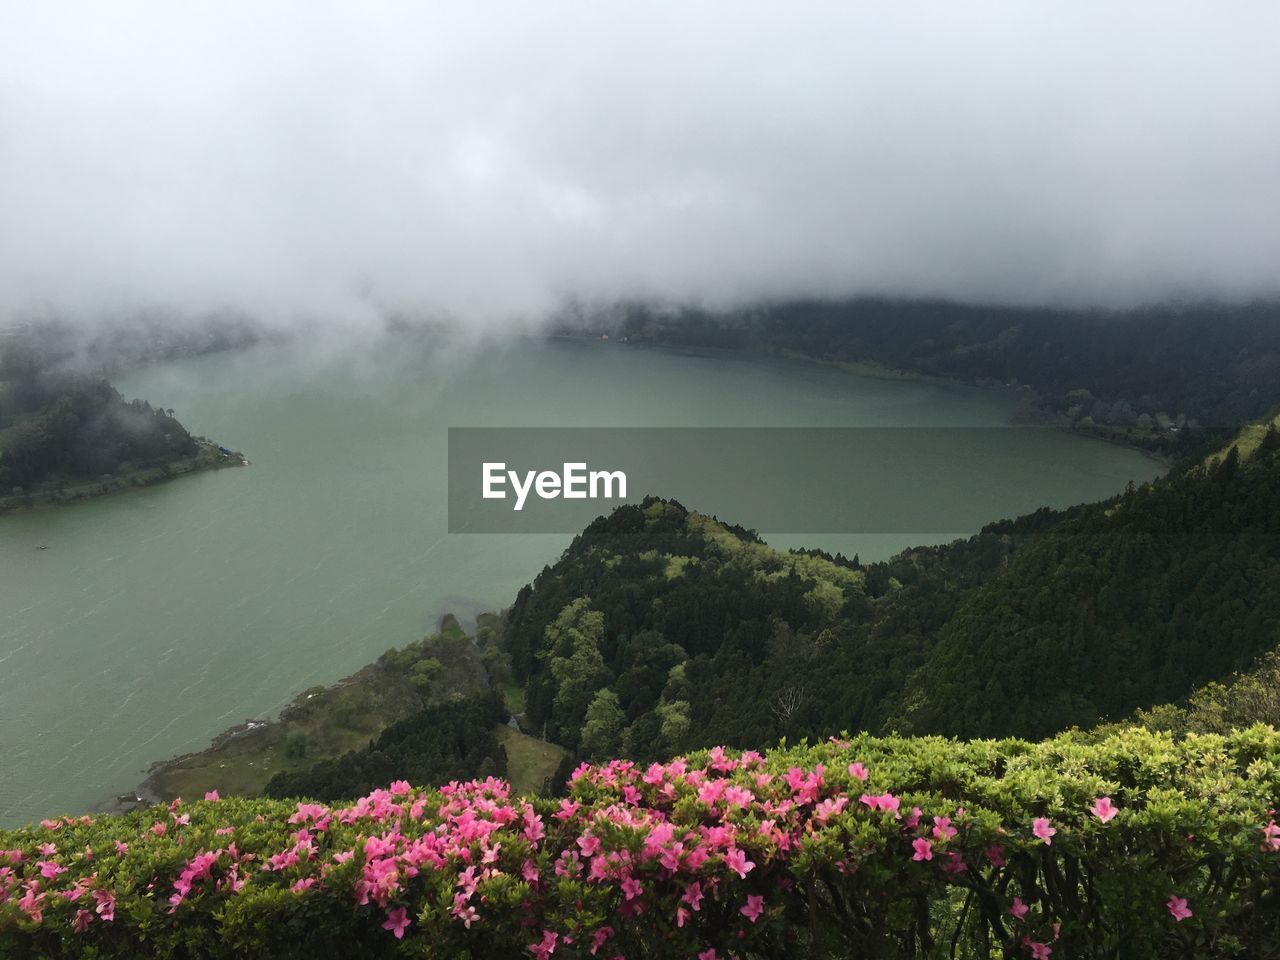 SCENIC VIEW OF LAKE BY MOUNTAINS DURING FOGGY WEATHER